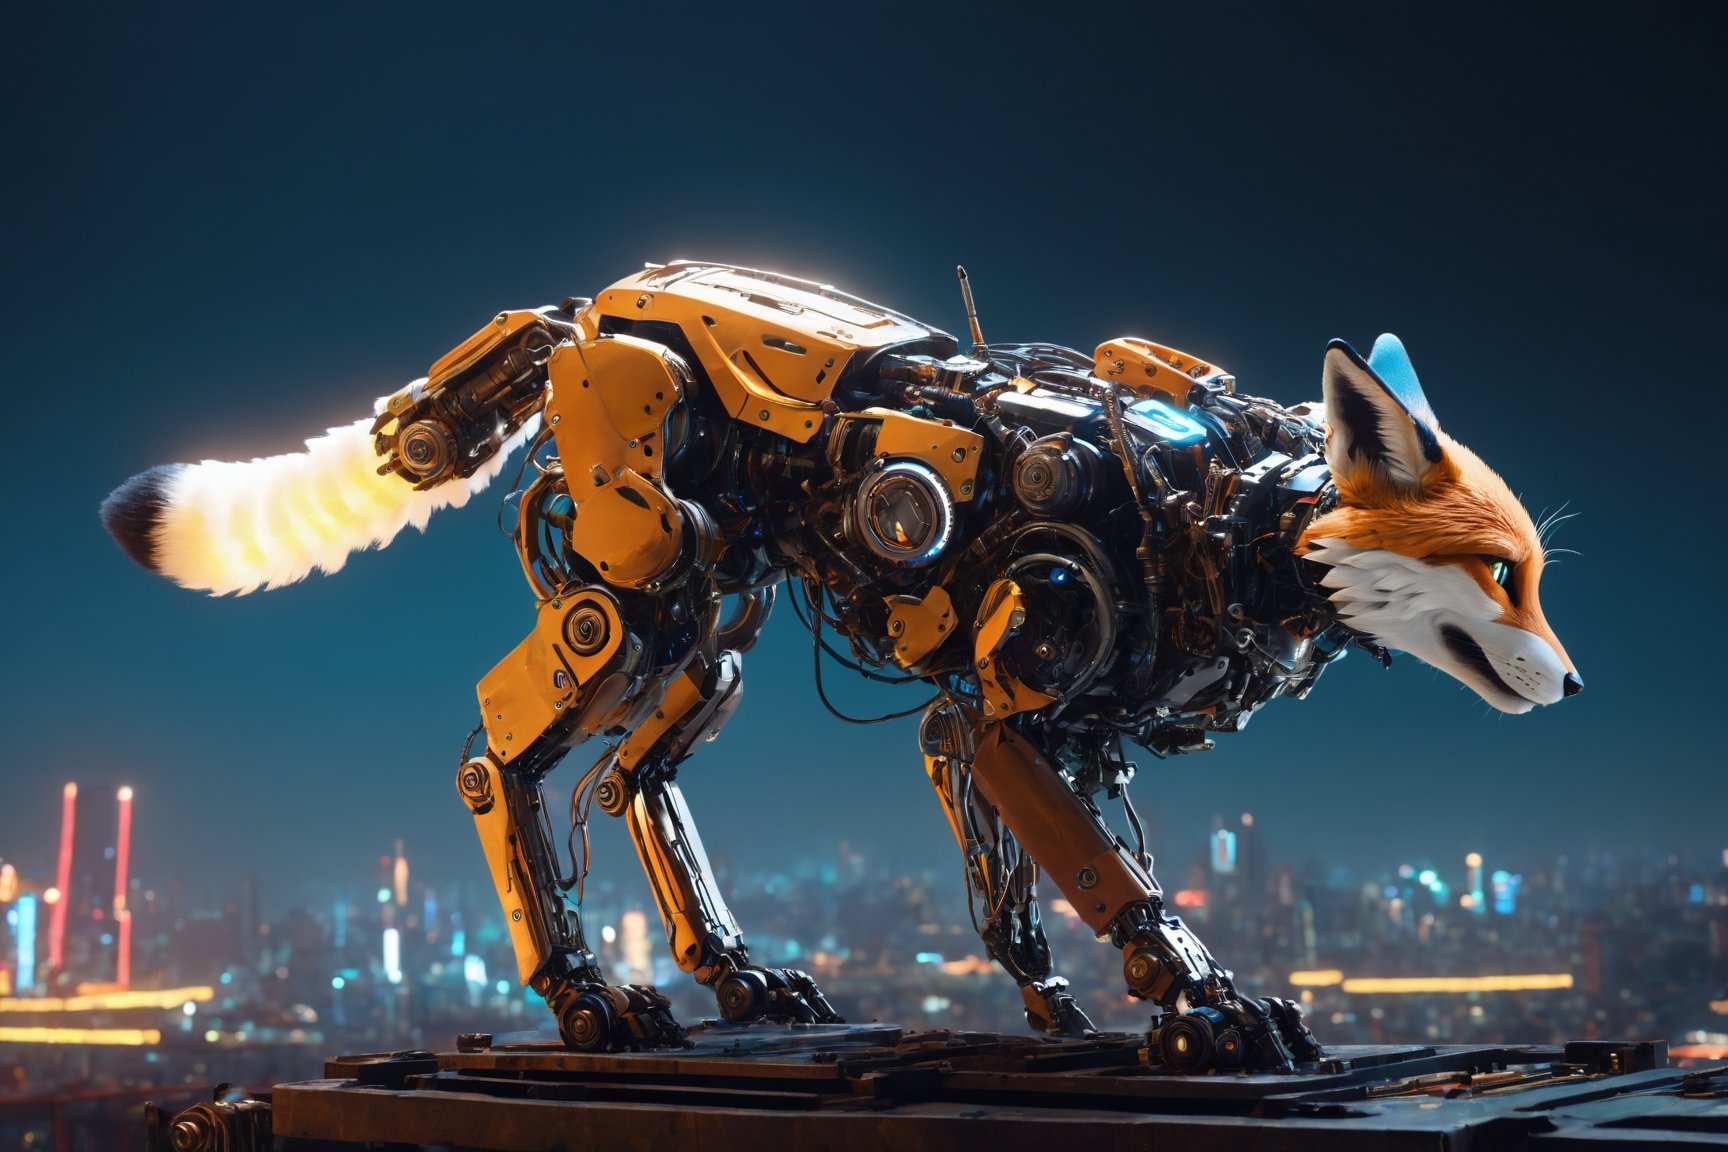 (best quality,4k,8k,highres,masterpiece:1.2),ultra-detailed,(realistic,photorealistic,photo-realistic:1.37),mechanical,robot,cyborg,fox,sci-fi,fantasy,articulated robotic limbs,futuristic robotic design,glistening metallic surfaces,advanced technologies,steampunk elements,intricate mechanical gears,glowing LED lights,mysterious and dramatic atmosphere,urban cityscape background,ethereal and magical fox companion,hovering in mid-air,intense cinematic lighting,colorful and vibrant sci-fi palette,showcasing the fusion of machinery and nature